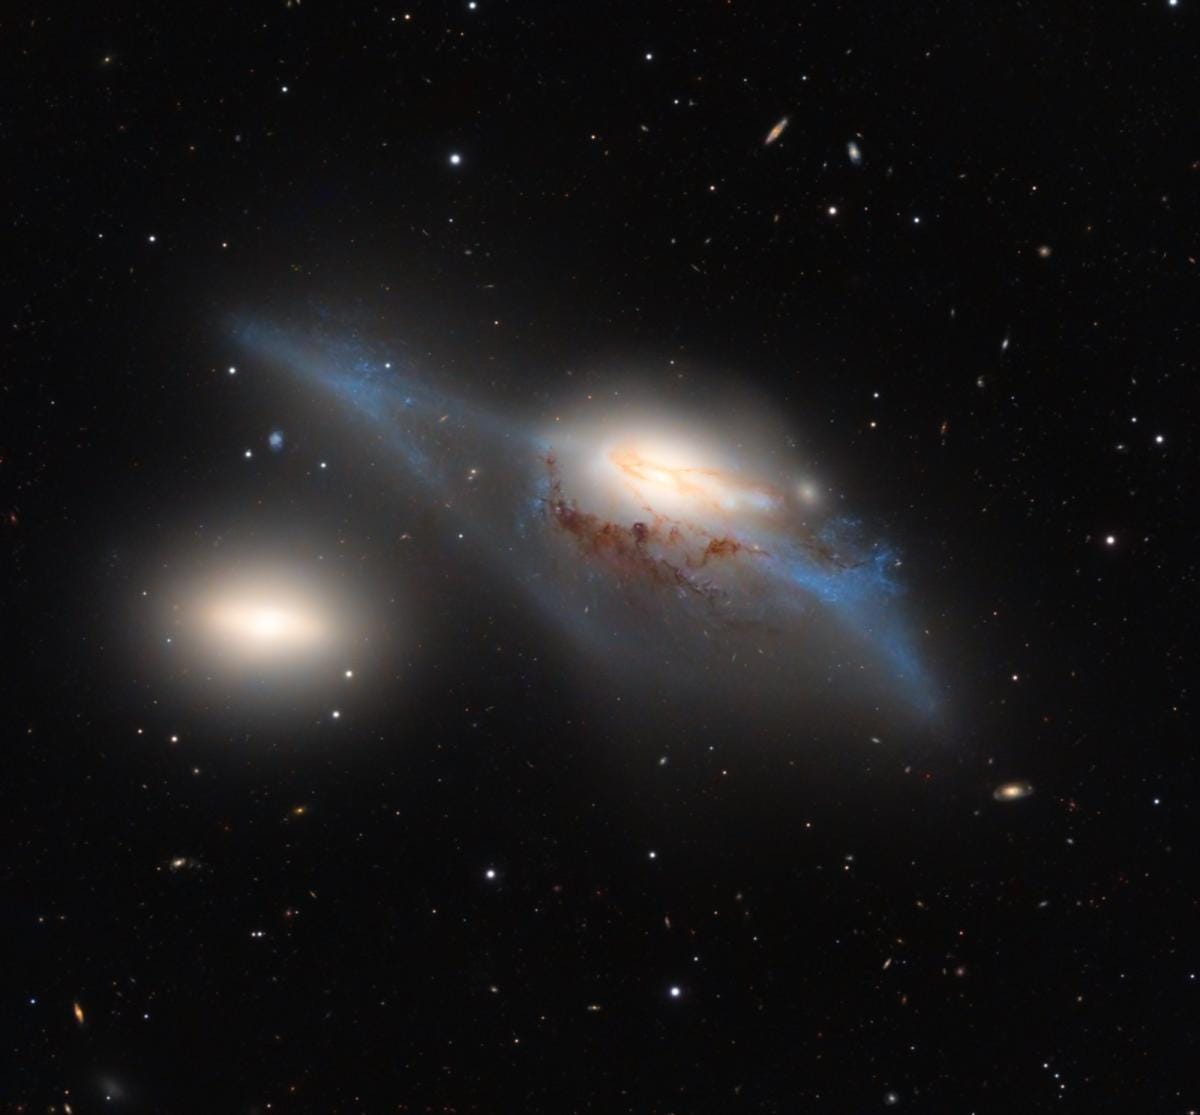 Interacting galaxy looks like two glowing blobs of fuzzy material against a star and galaxy-studded backdrop.